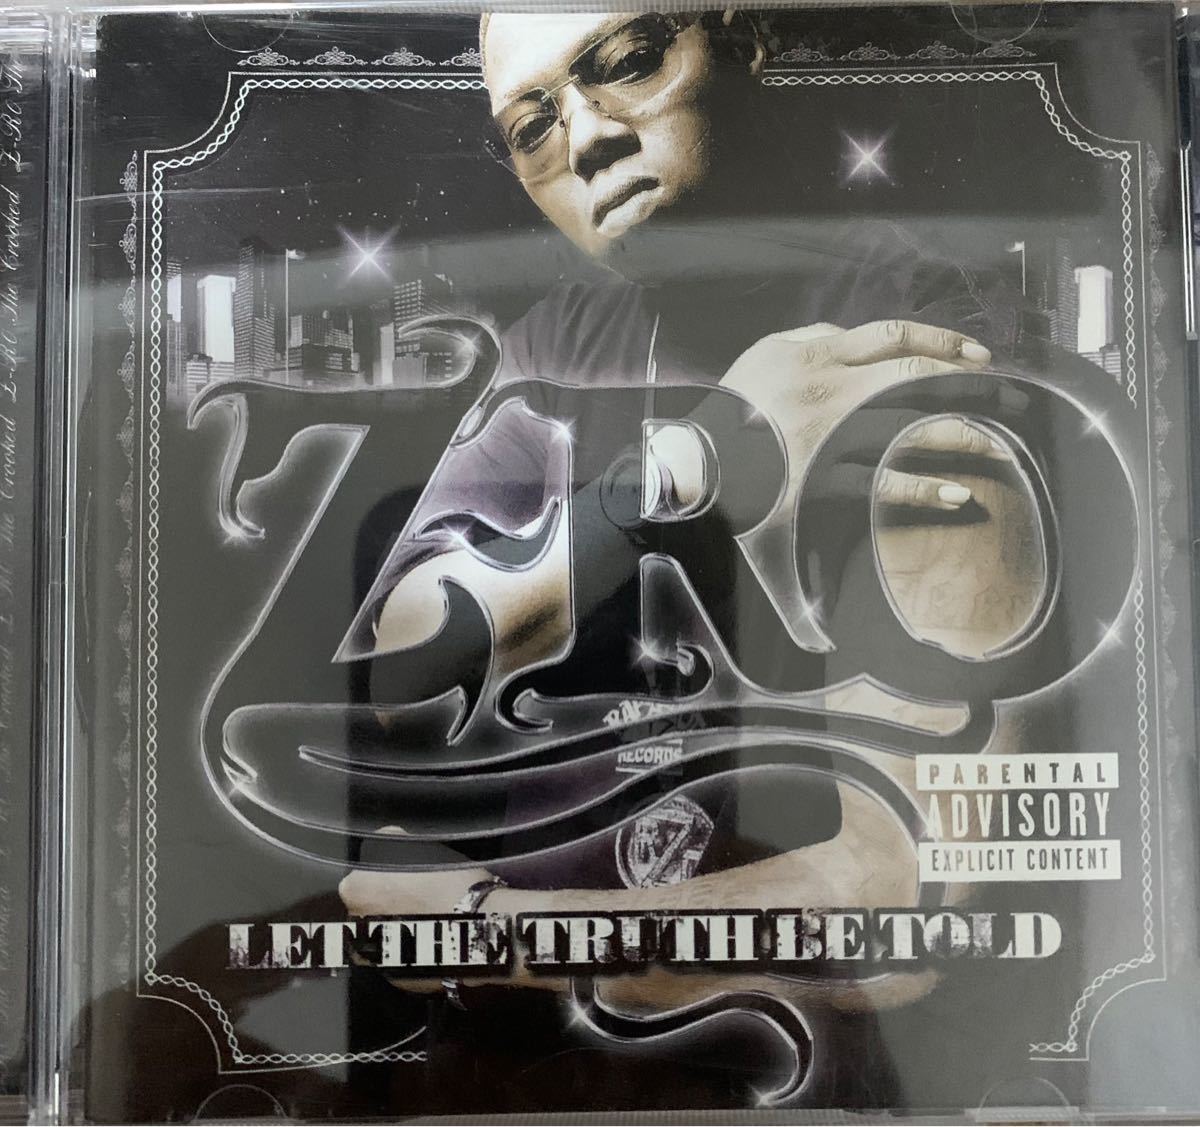 z-ro let the truth be told